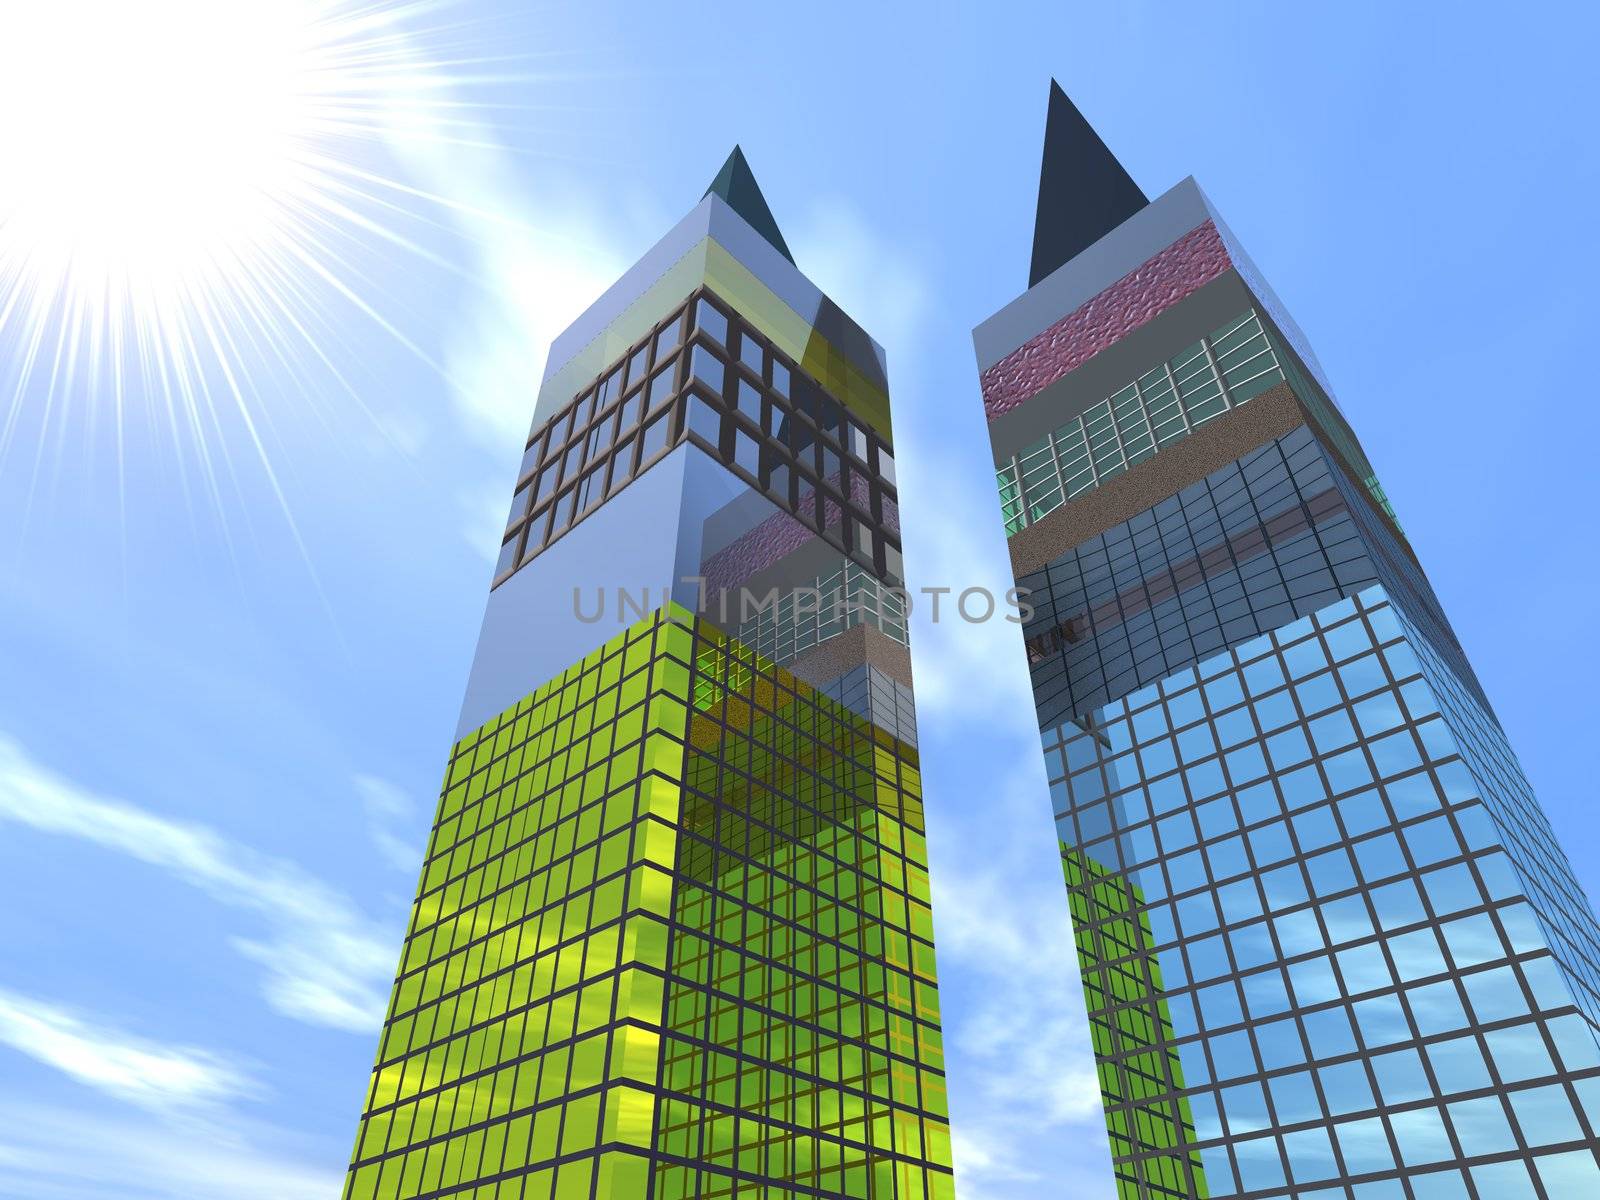 Two fantastic skyscrapers by galdzer